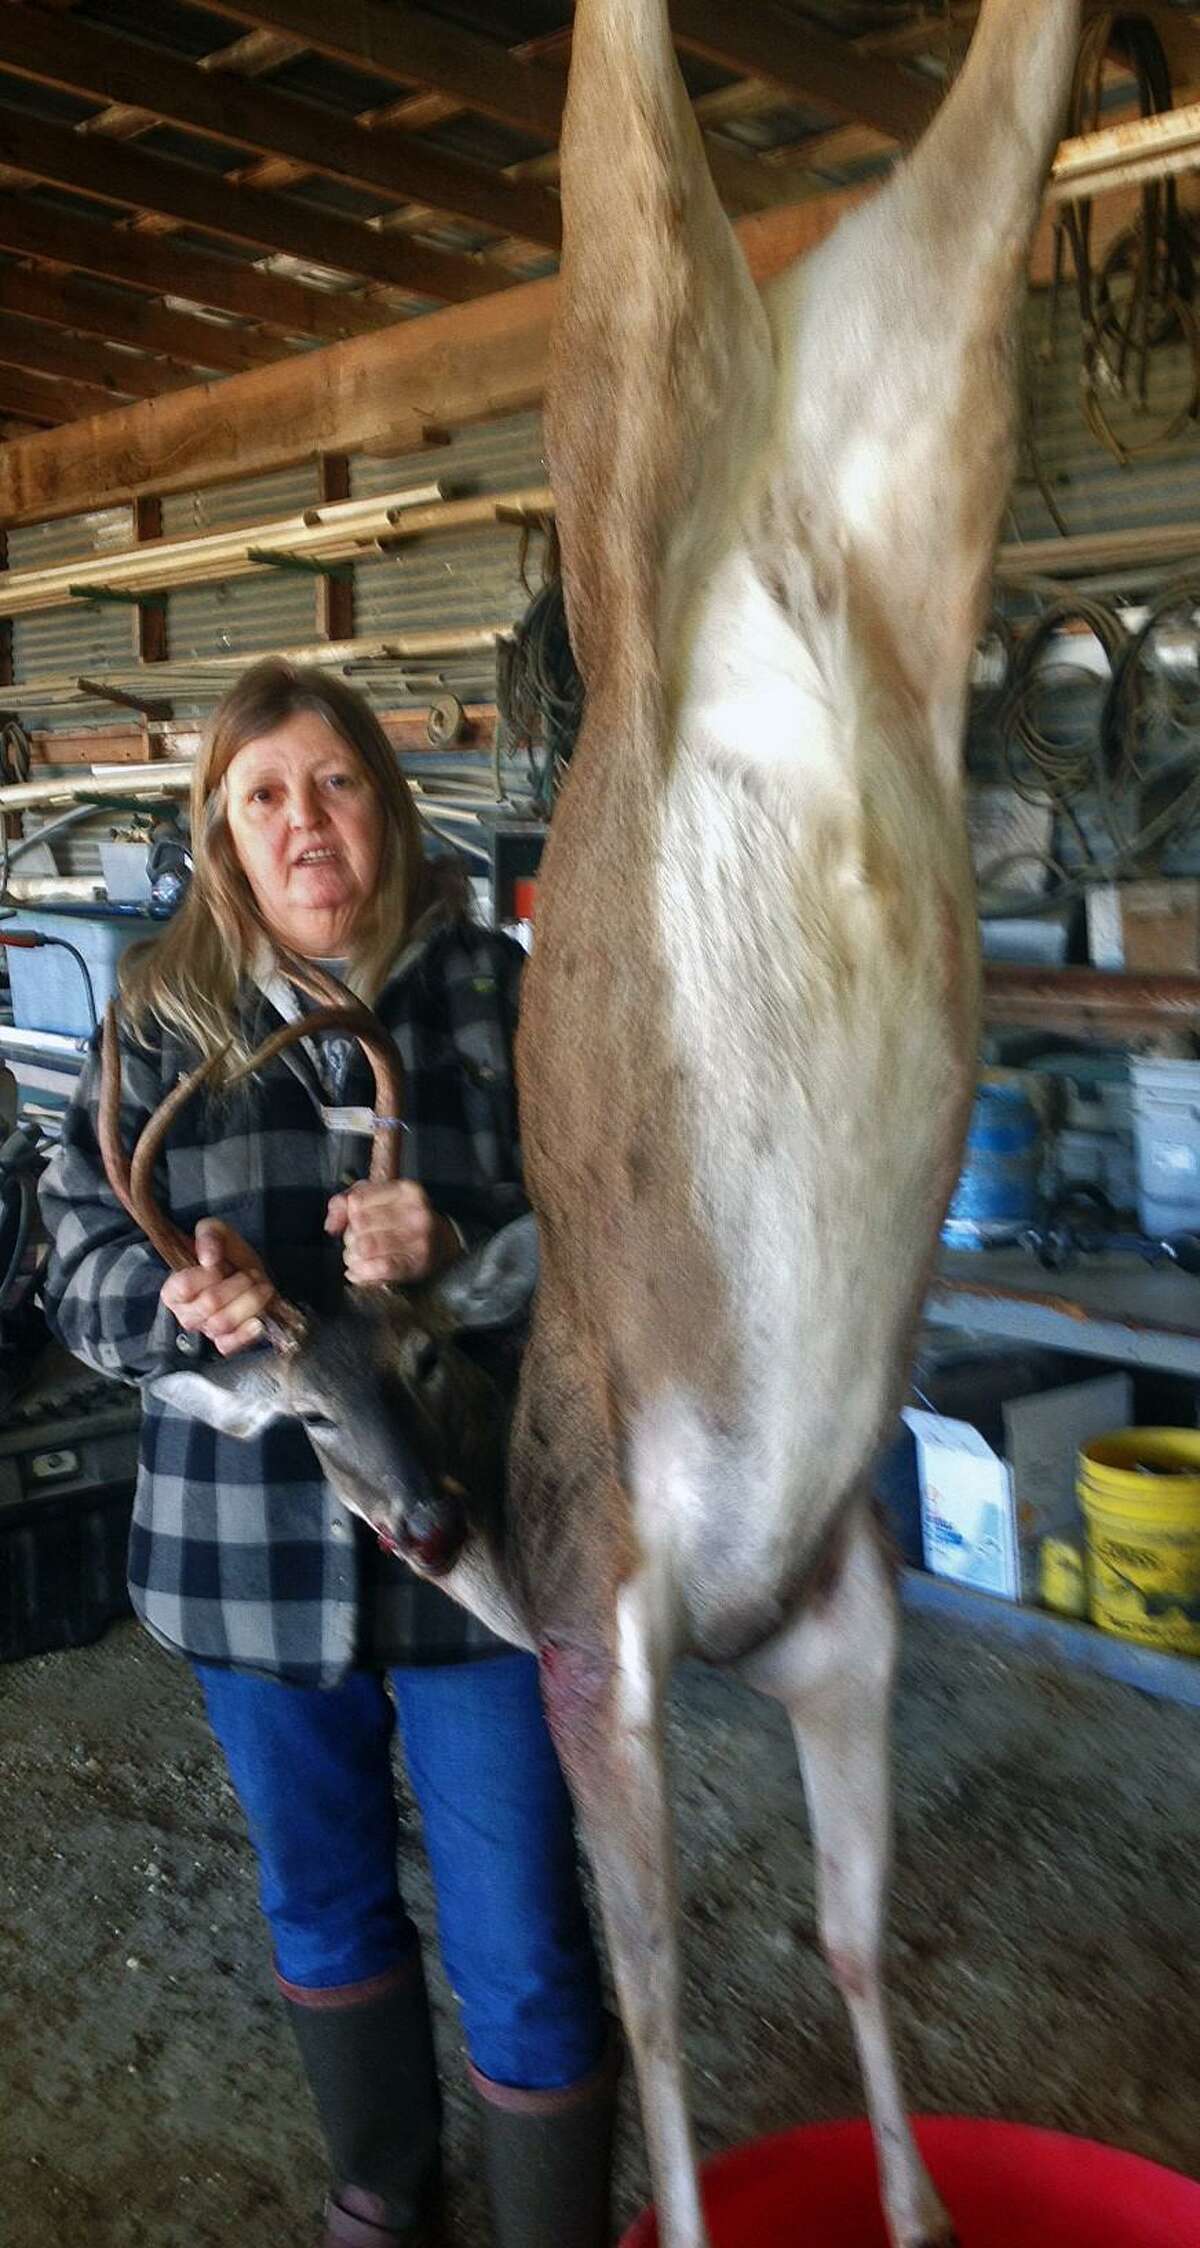 Debbie Ray poses with her ‘cull buck’ trophy she shot on opening morning near Spring Branch that turned out to be a doe with antlers.